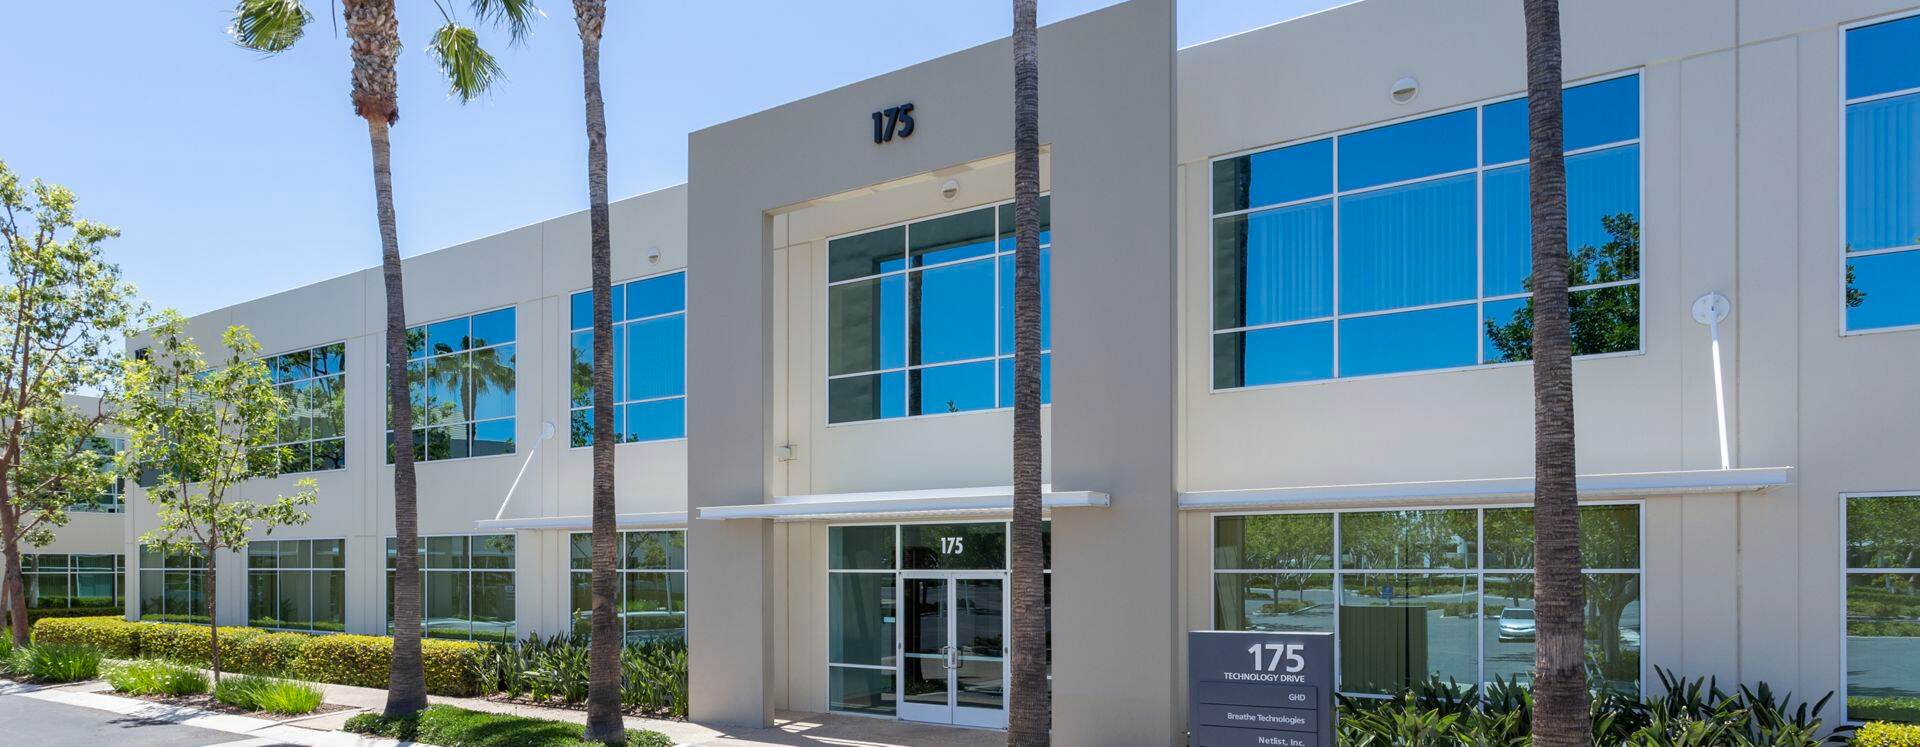 Exterior building photography of 175 Technology entry at Corporate Business Center in Irvine, CA